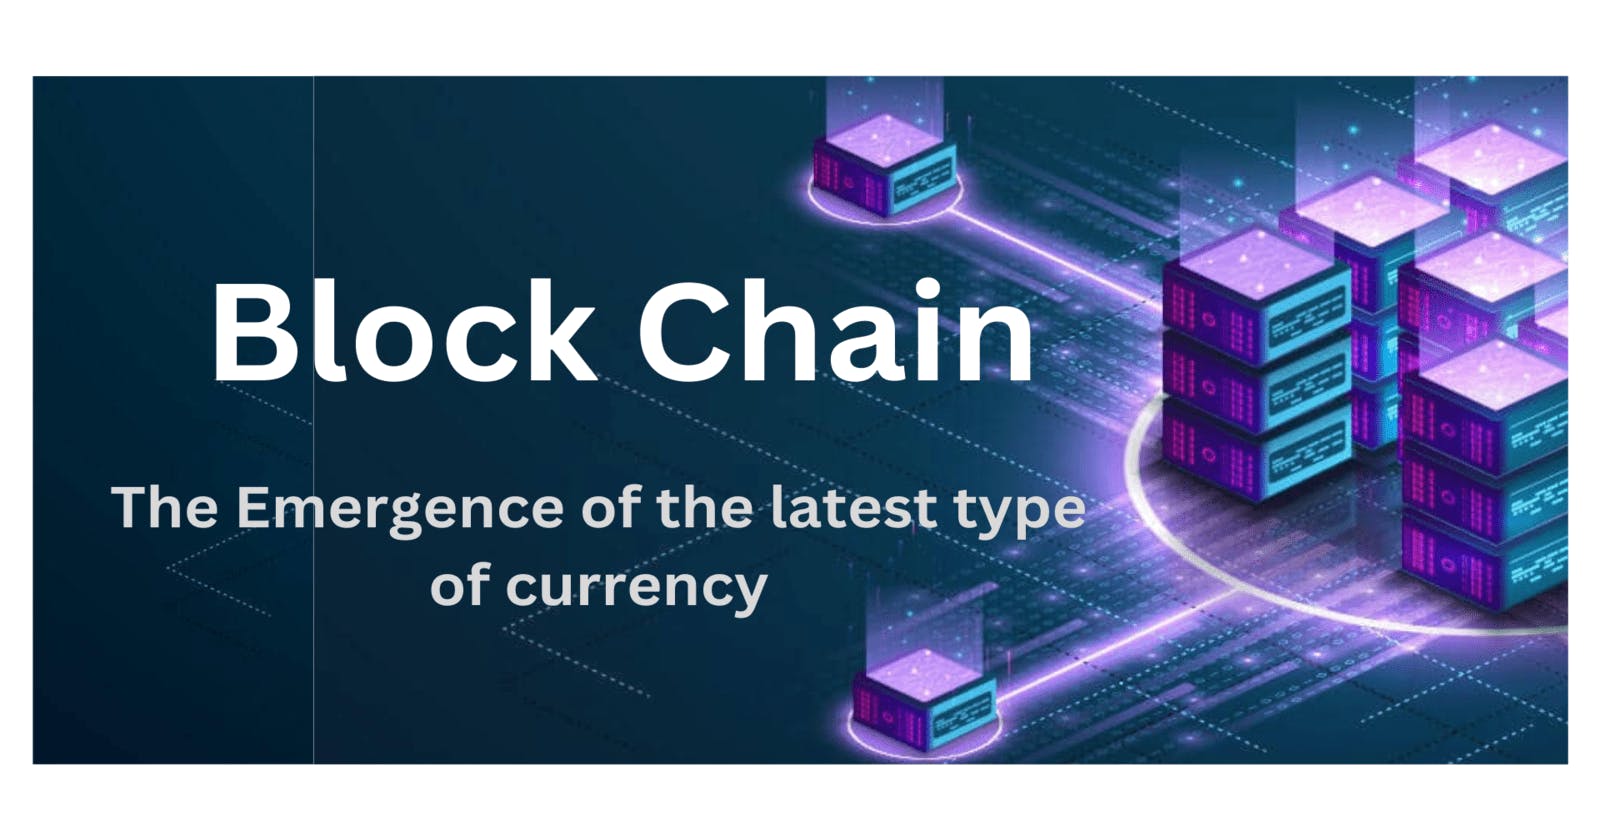 Block Chain - The Emergence of the latest type of currency